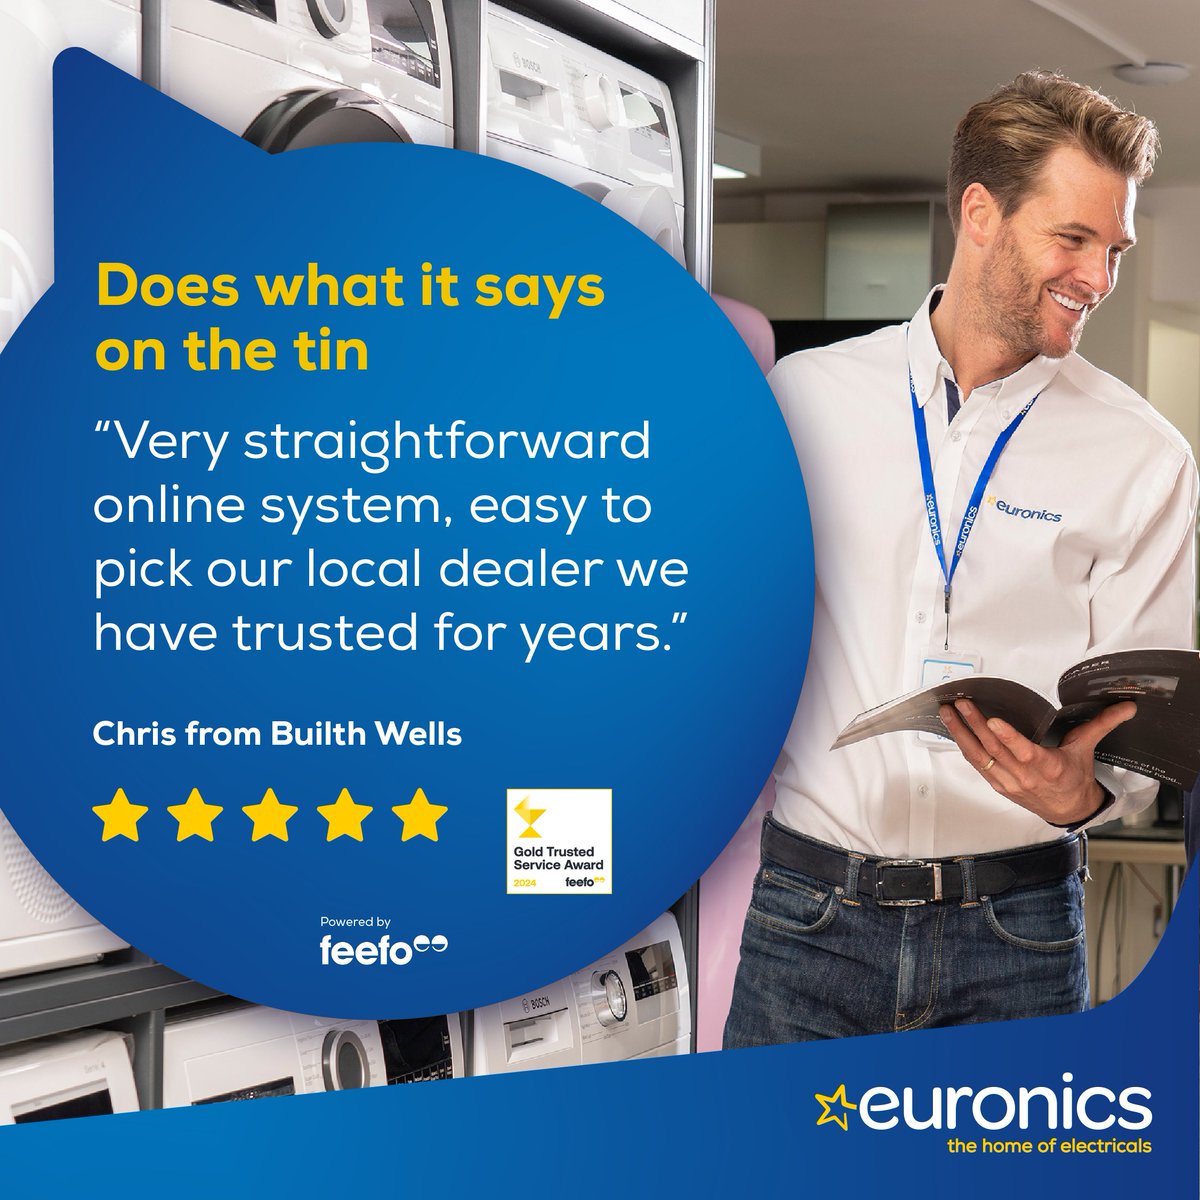 We love happy customers! Choose from hundreds of hand-picked products, all delivered by your local Euronics dealer. With a price-check promise, flexible delivery, and local service, shopping locally has never been easier. euronics.la/m/Euronics #TheHomeofElectricals #ShopLocal